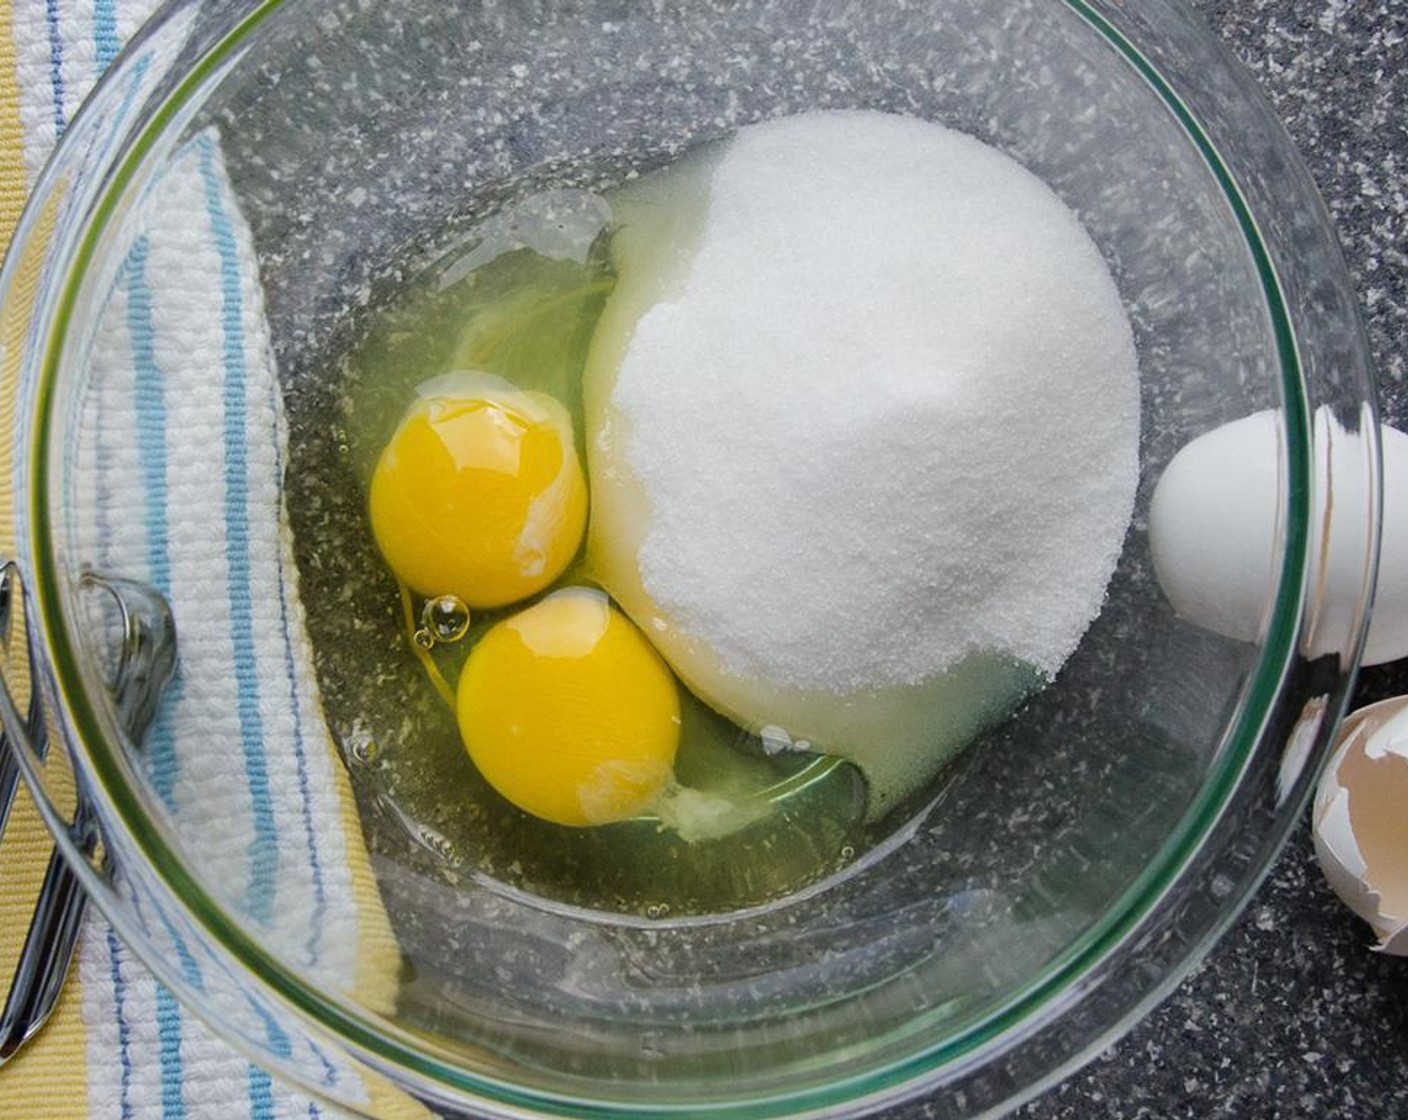 step 1 In a medium mixing bowl, using a hand mixer, beat together the Granulated Sugar (2/3 cup) and Eggs (2) until thickened and pale yellow, about 3 minutes.